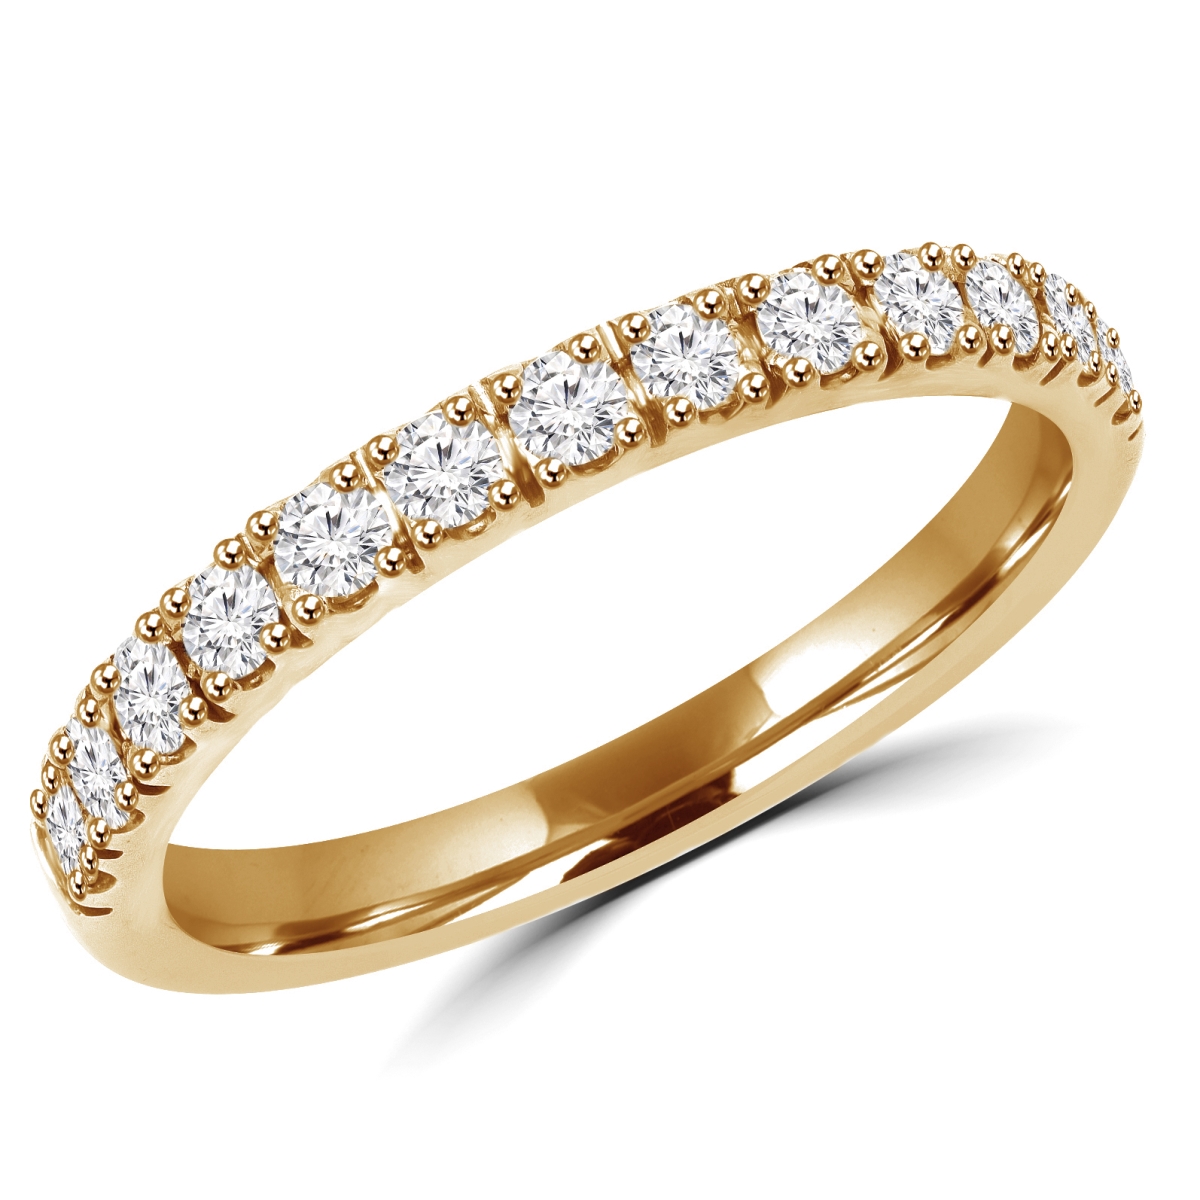 Picture of Majesty Diamonds MD180187-8.25 0.3 CTW Round Diamond Semi-Eternity Wedding Band Ring in 14K Yellow Gold - Size 8.25